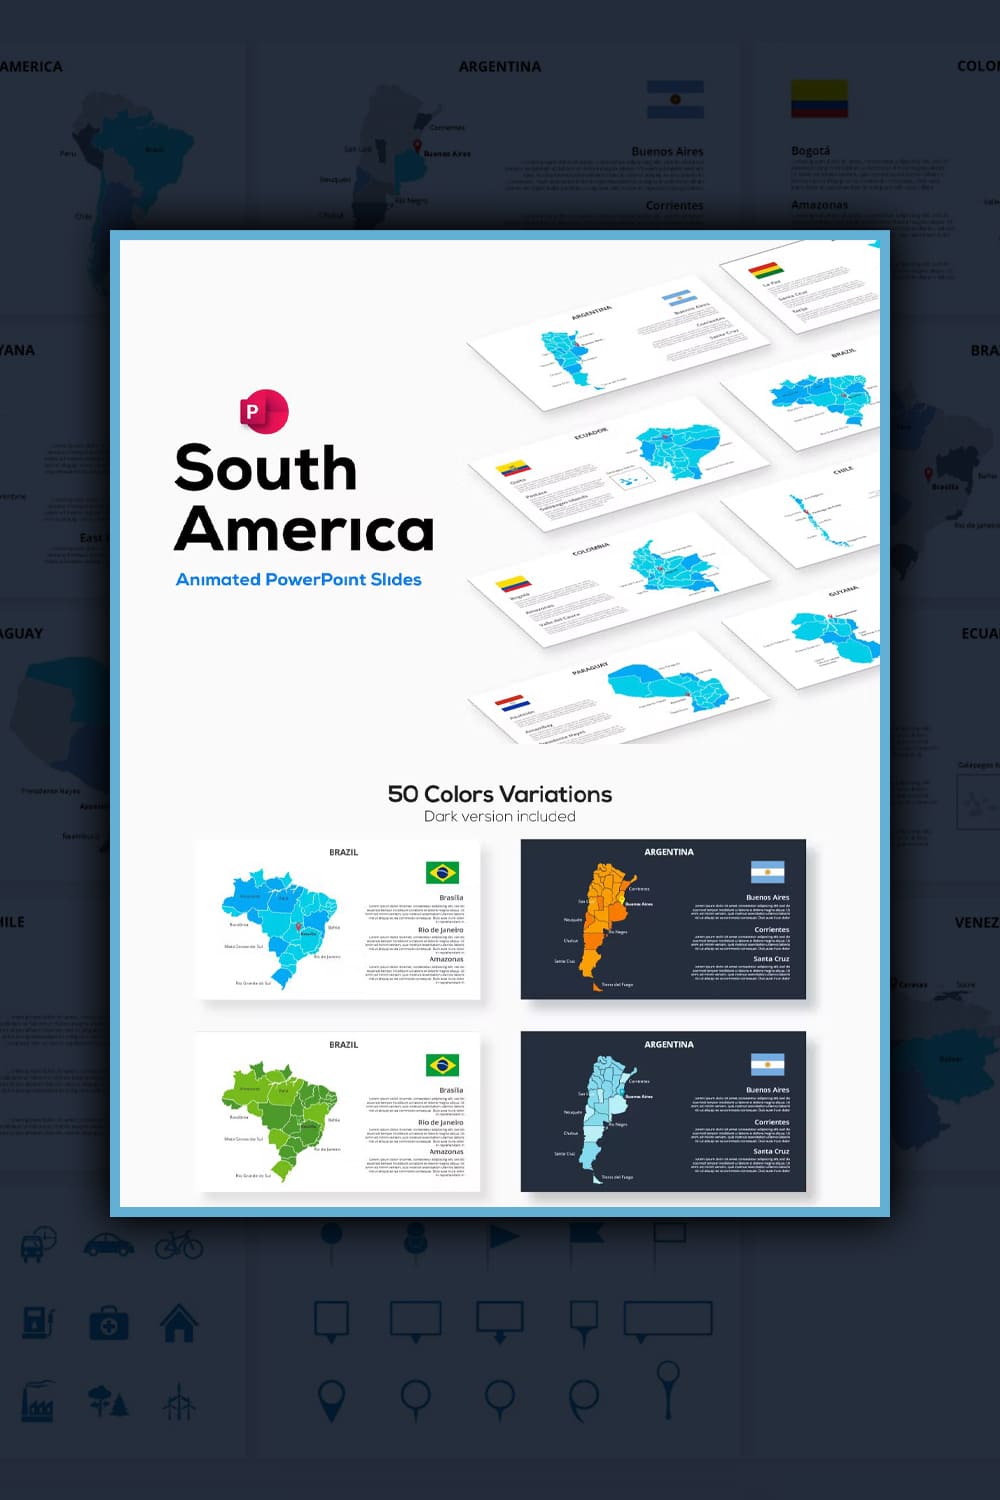 South America Maps PowerPoint Animated Slides - Pinterest.